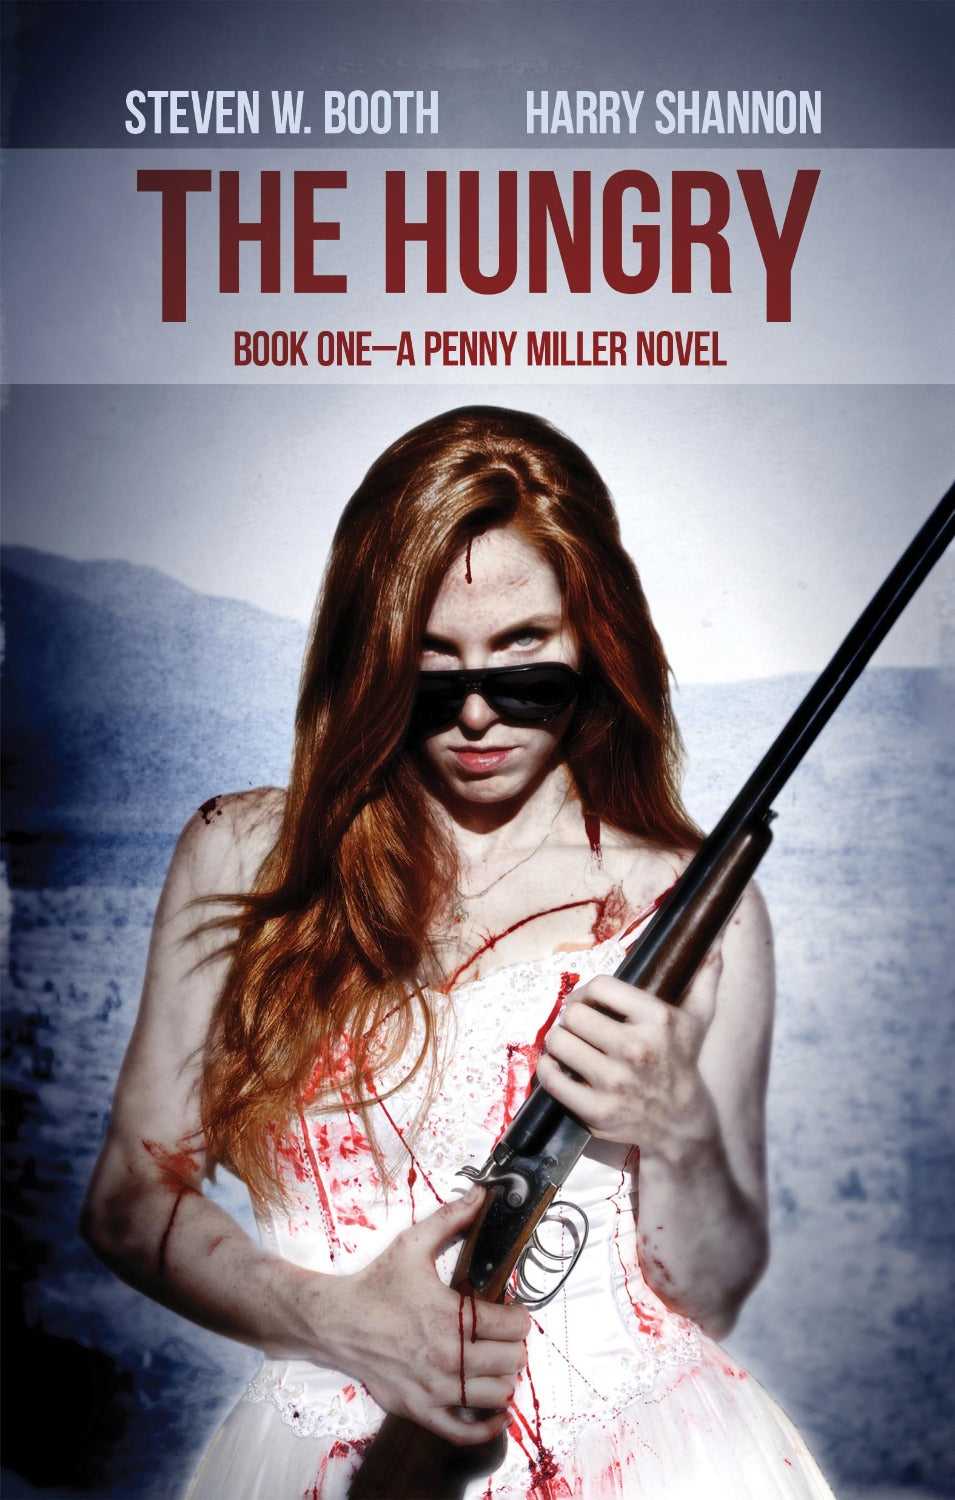 The Hungry - Penny Miller Book One